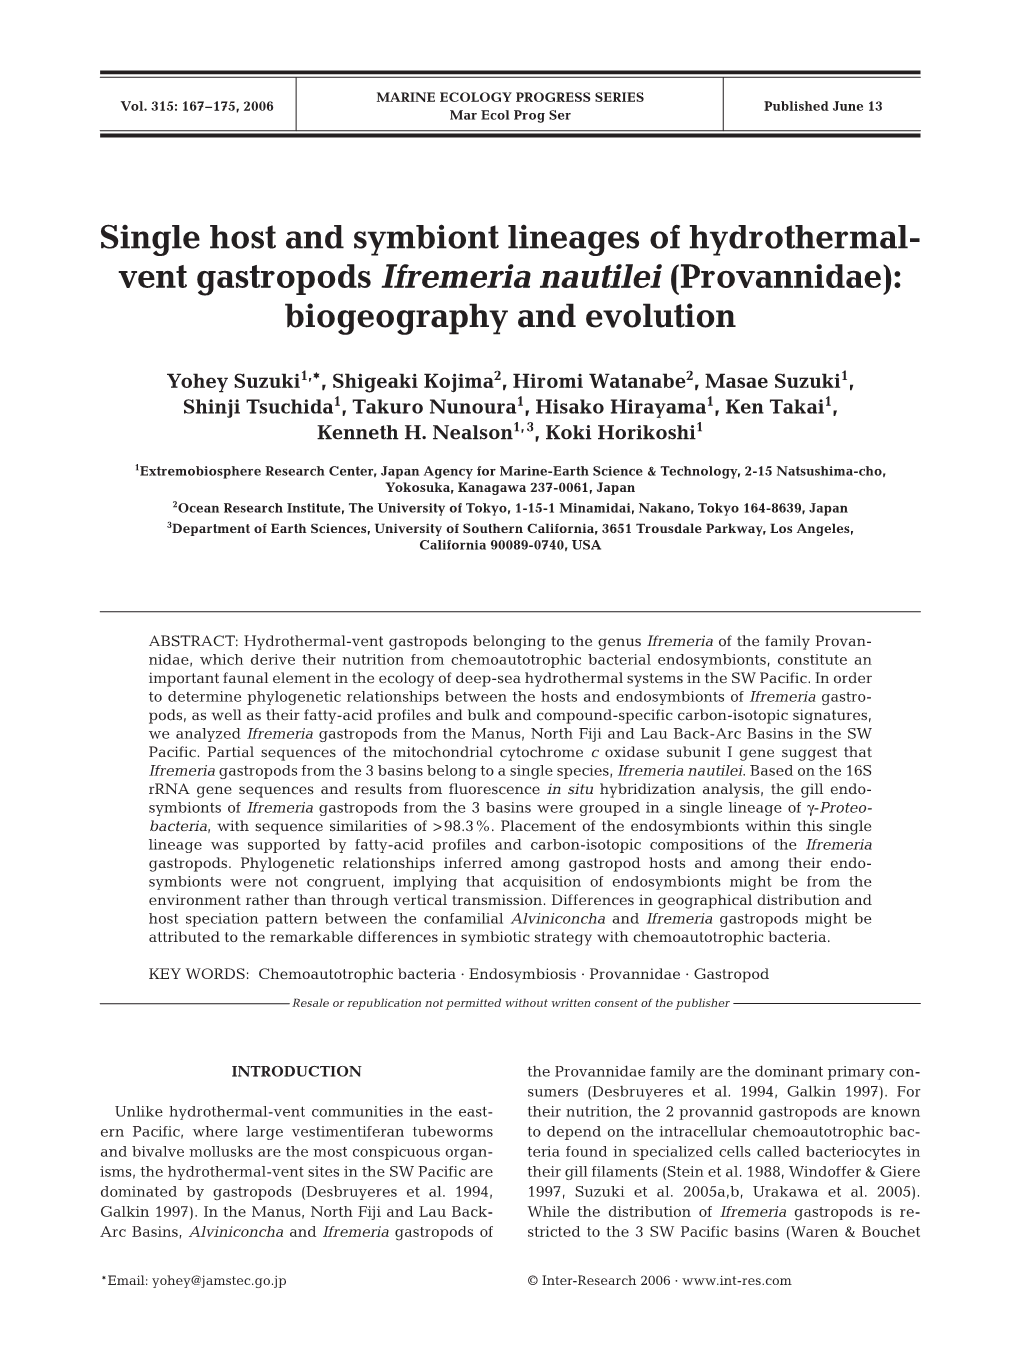 Single Host and Symbiont Lineages of Hydrothermal-Vent Gastropods Ifremeria Nautilei (Provannidae): Biogeography and Evolution